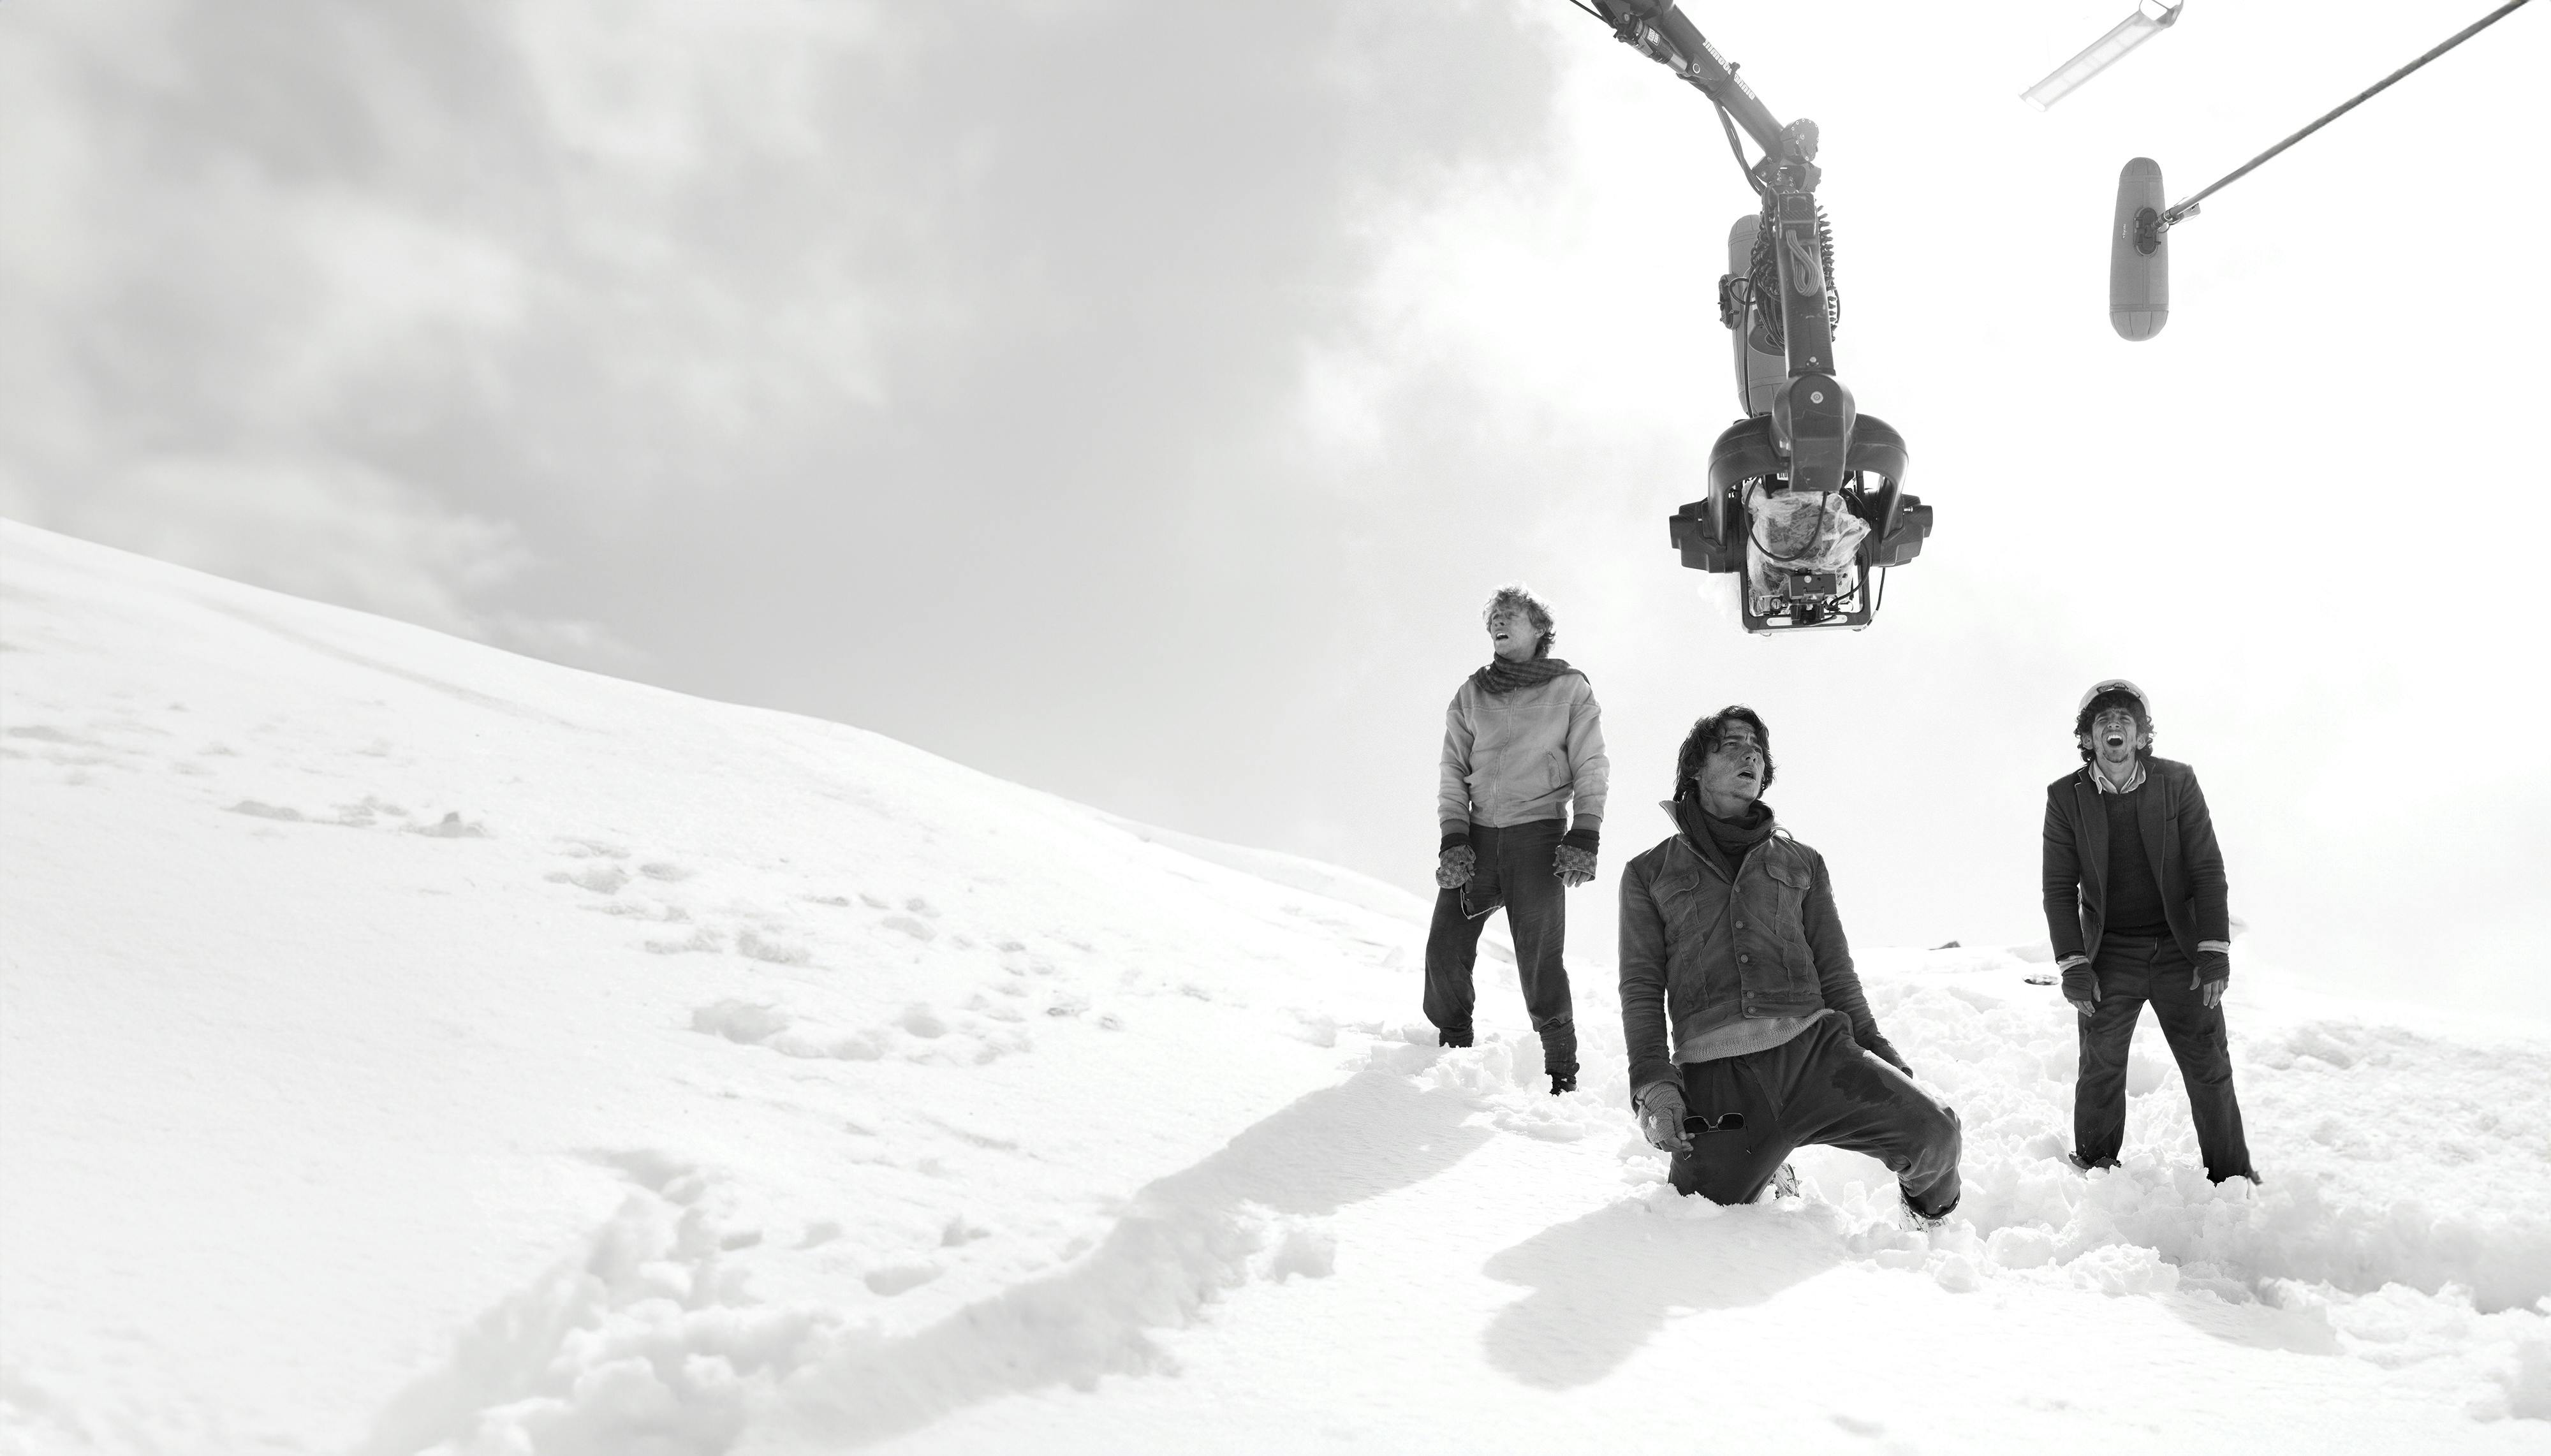 Santiago Vaca Narvaja, Enzo Vogrincic, and Tomás Wolf stand in the snow underneath a camera and boom mic.